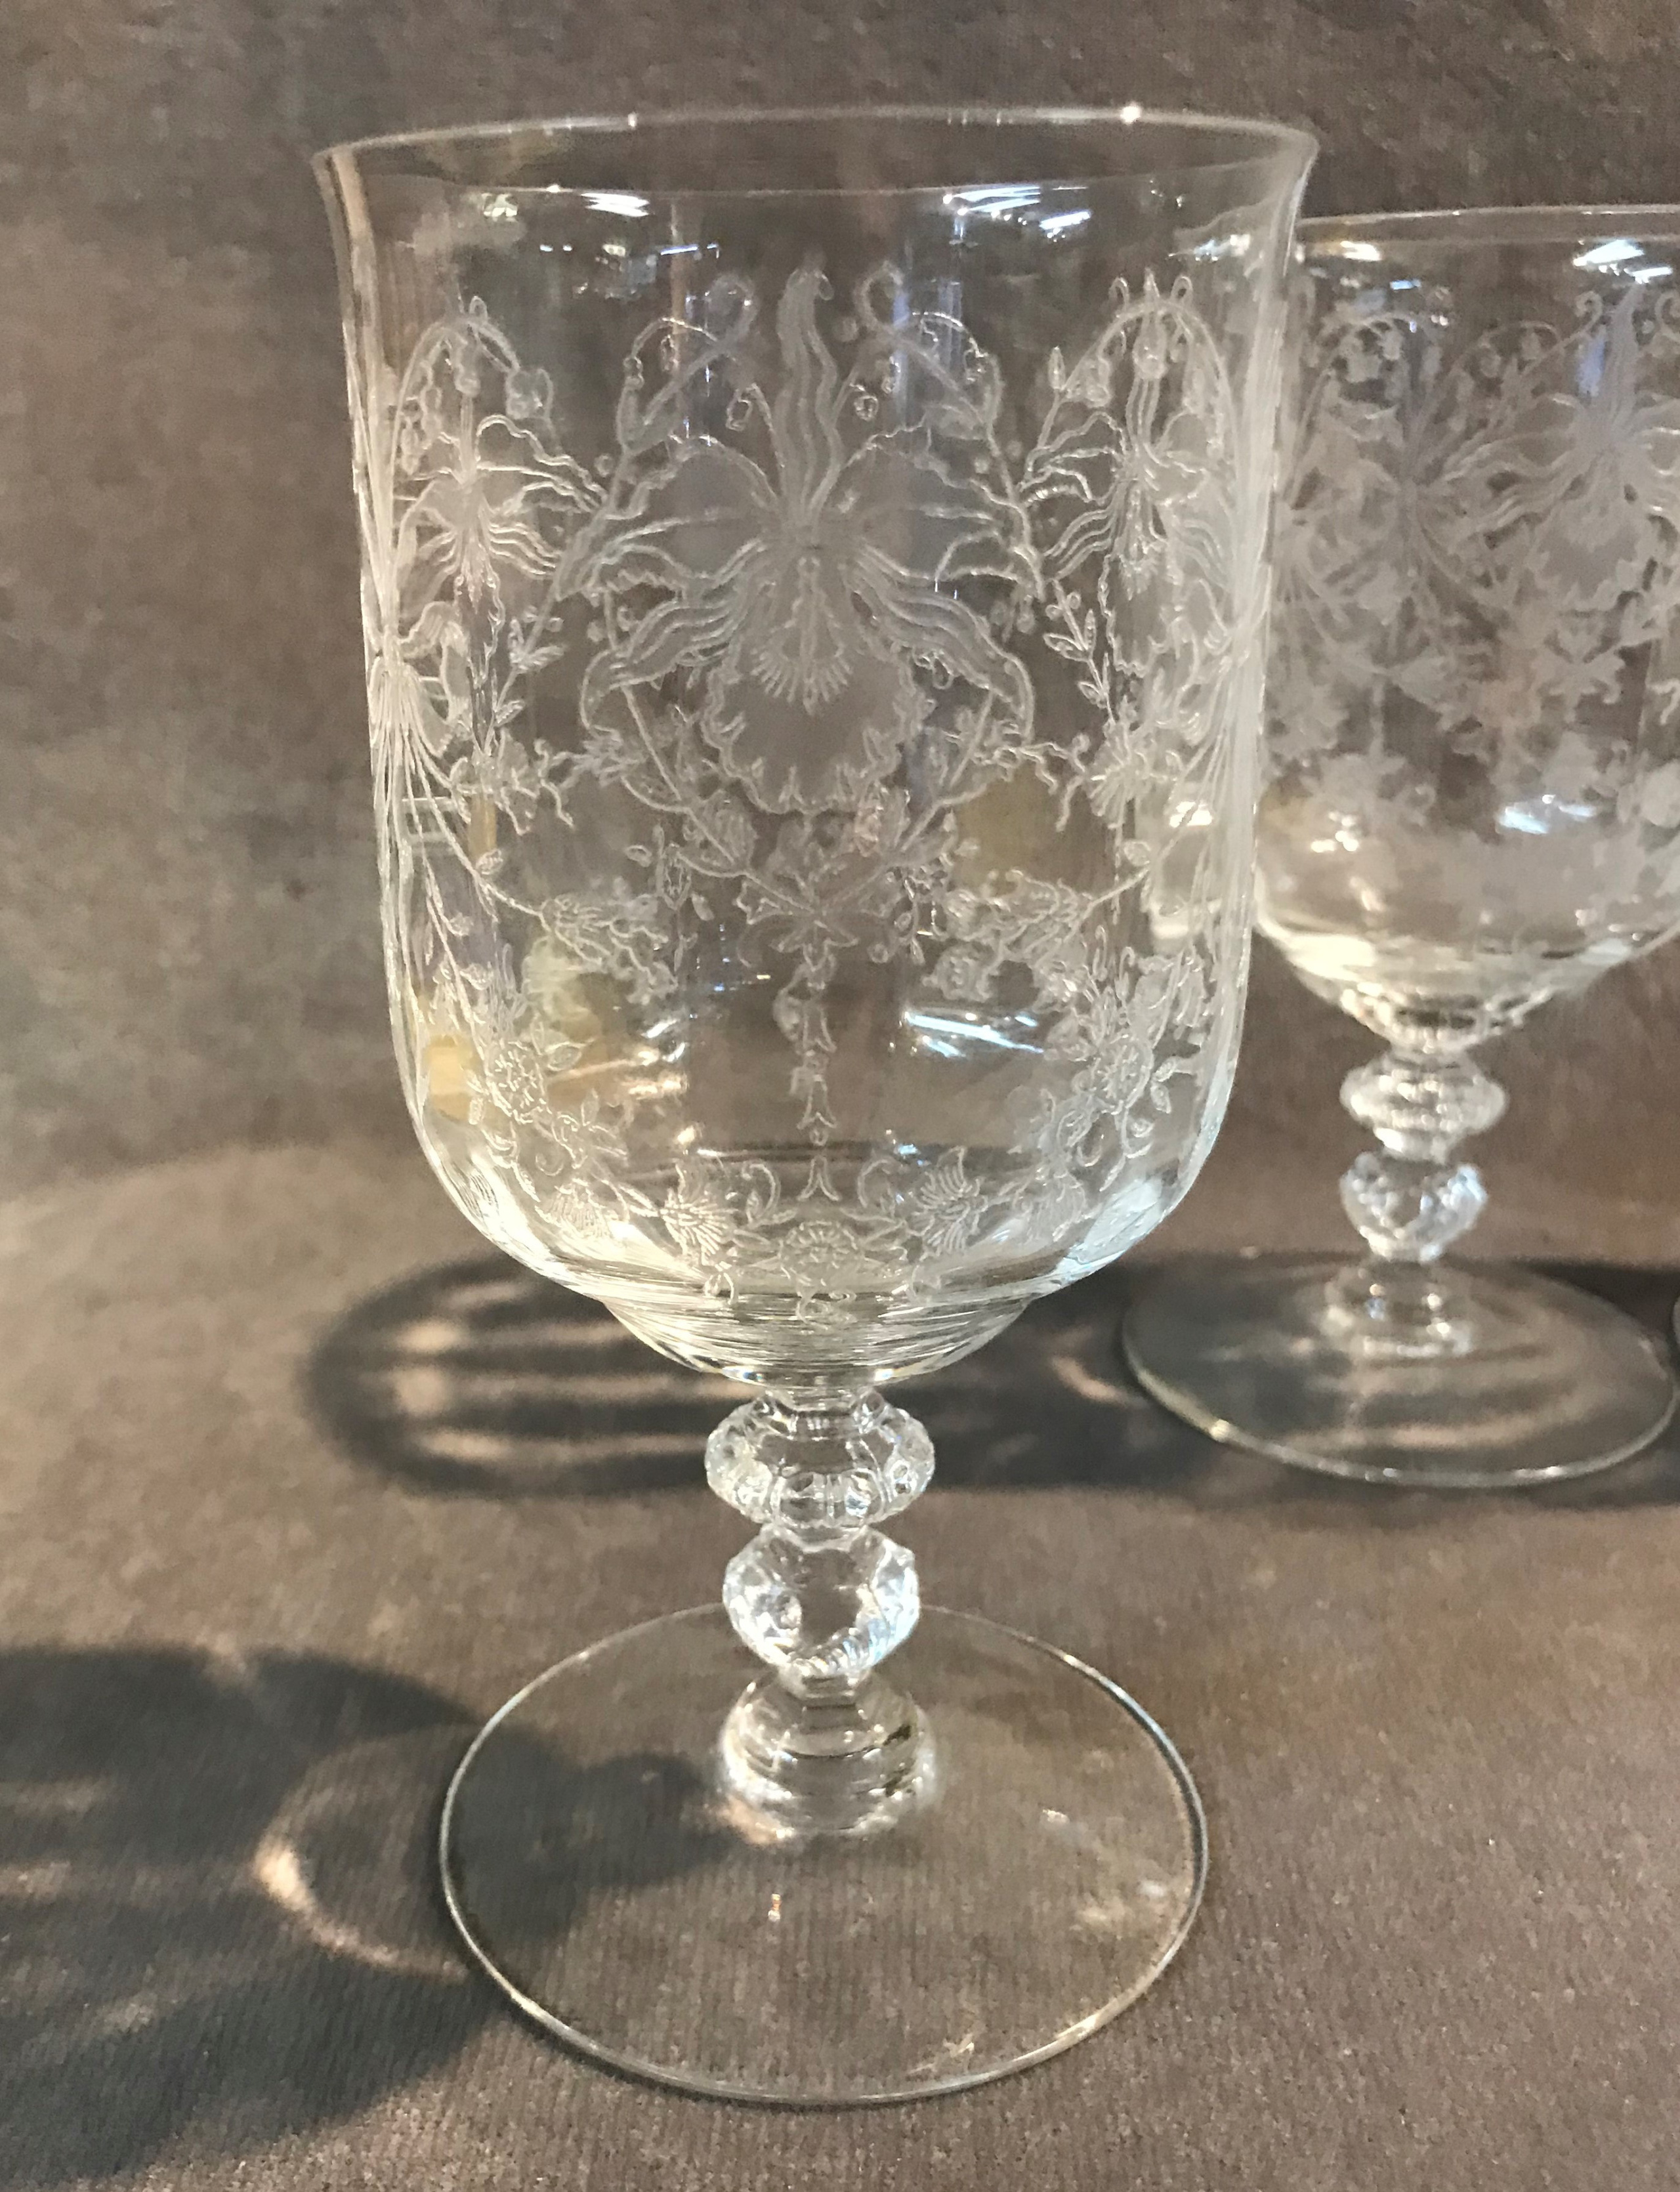 6 Vintage Etched Tall Wine Glasses ~ Water Goblets, 1950's Etched Wine  Glasses, Unique Shaped Wine Glasses, Wedding Glasses